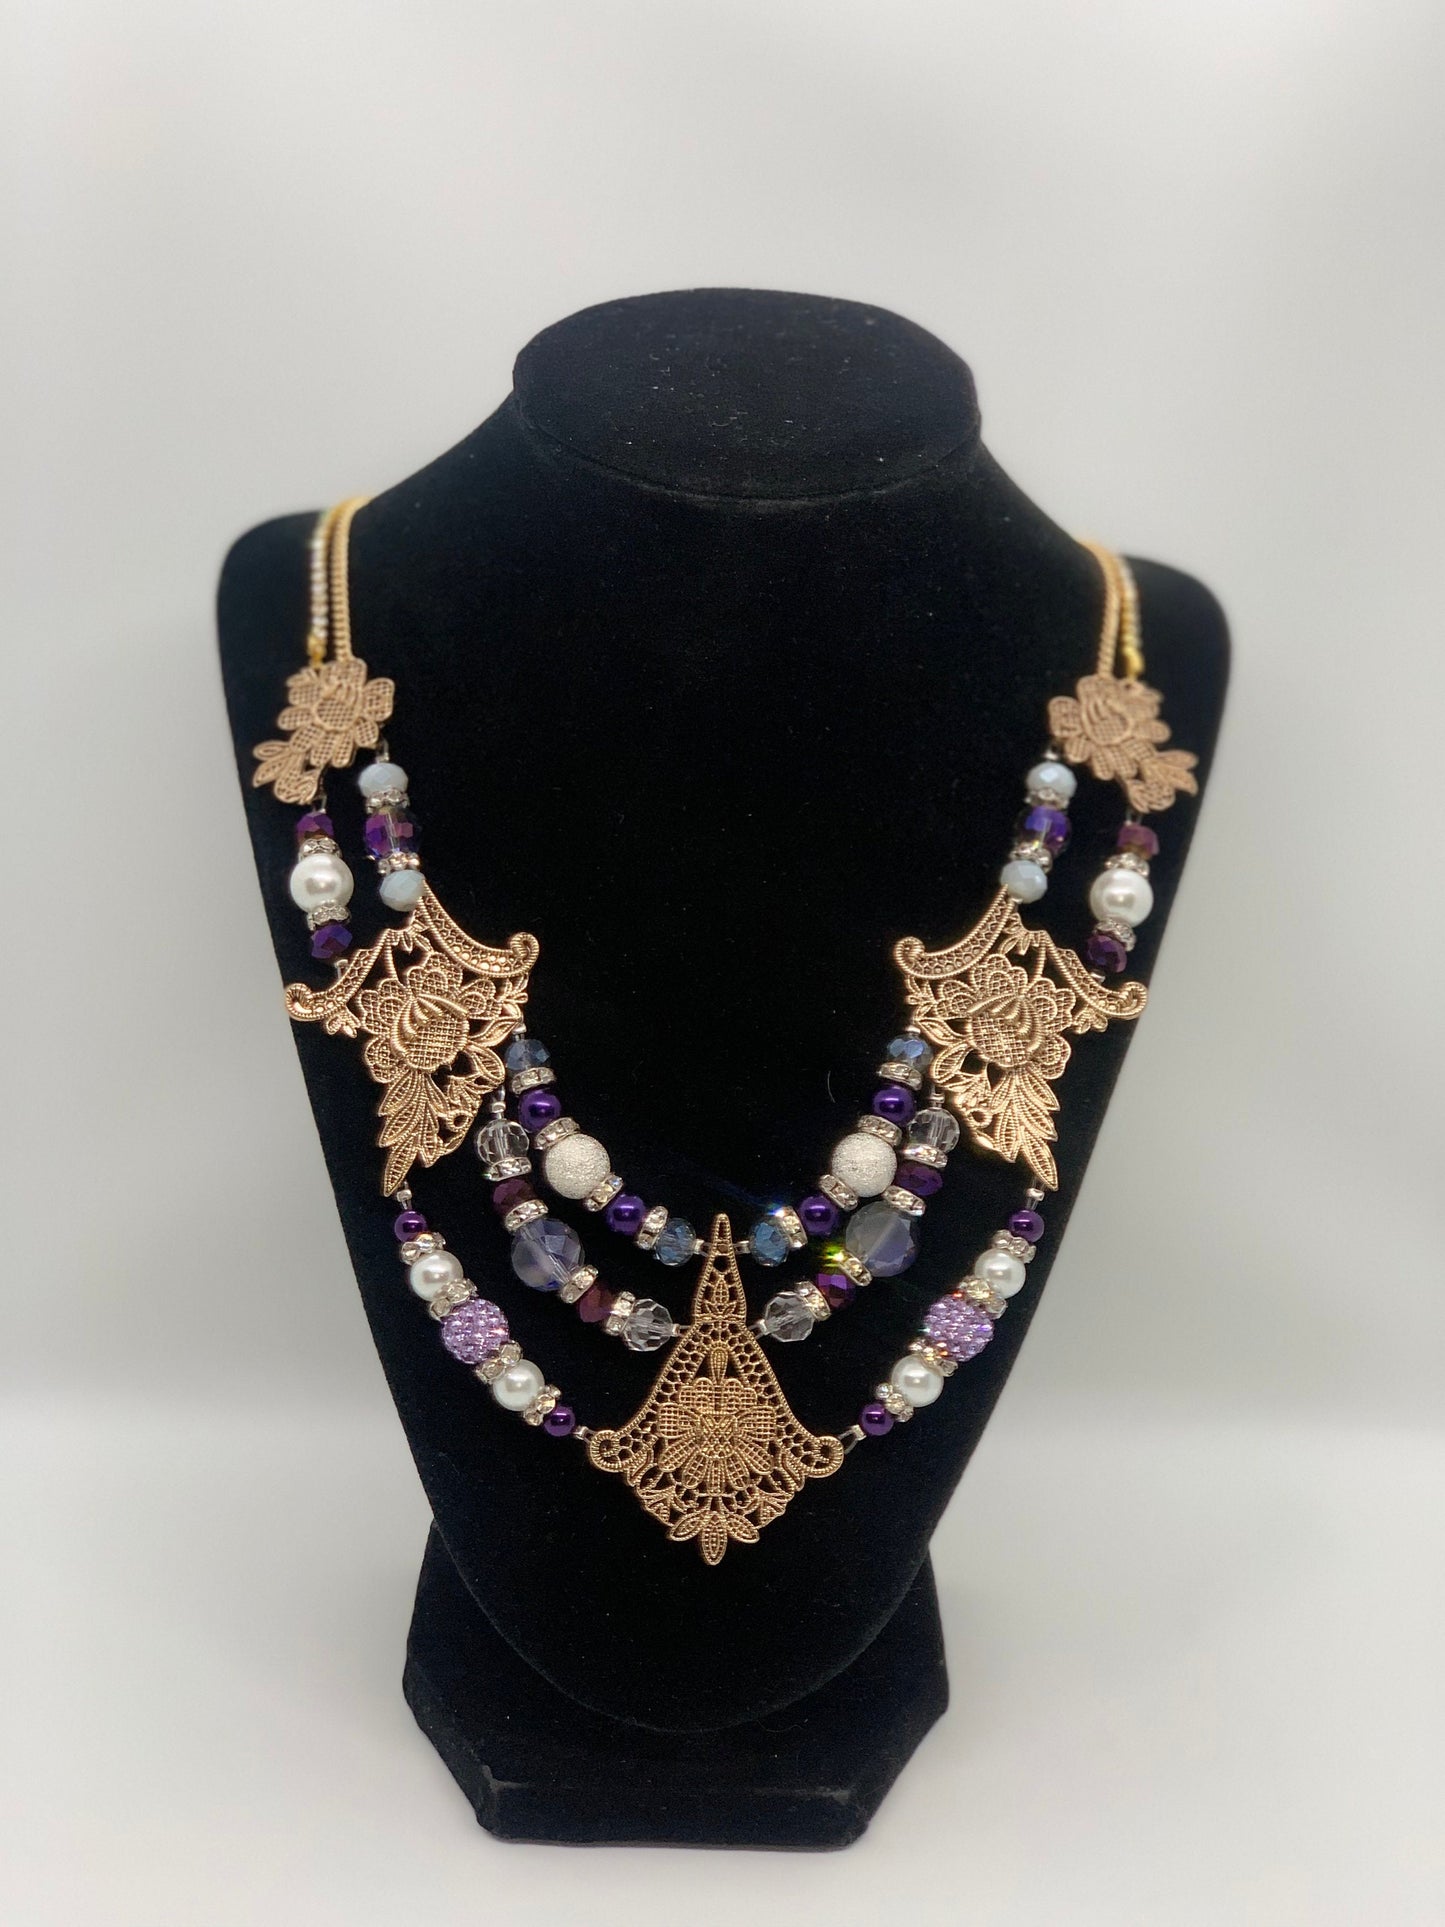 Vintage style necklace with matching earrings-One of Kind-Victoria